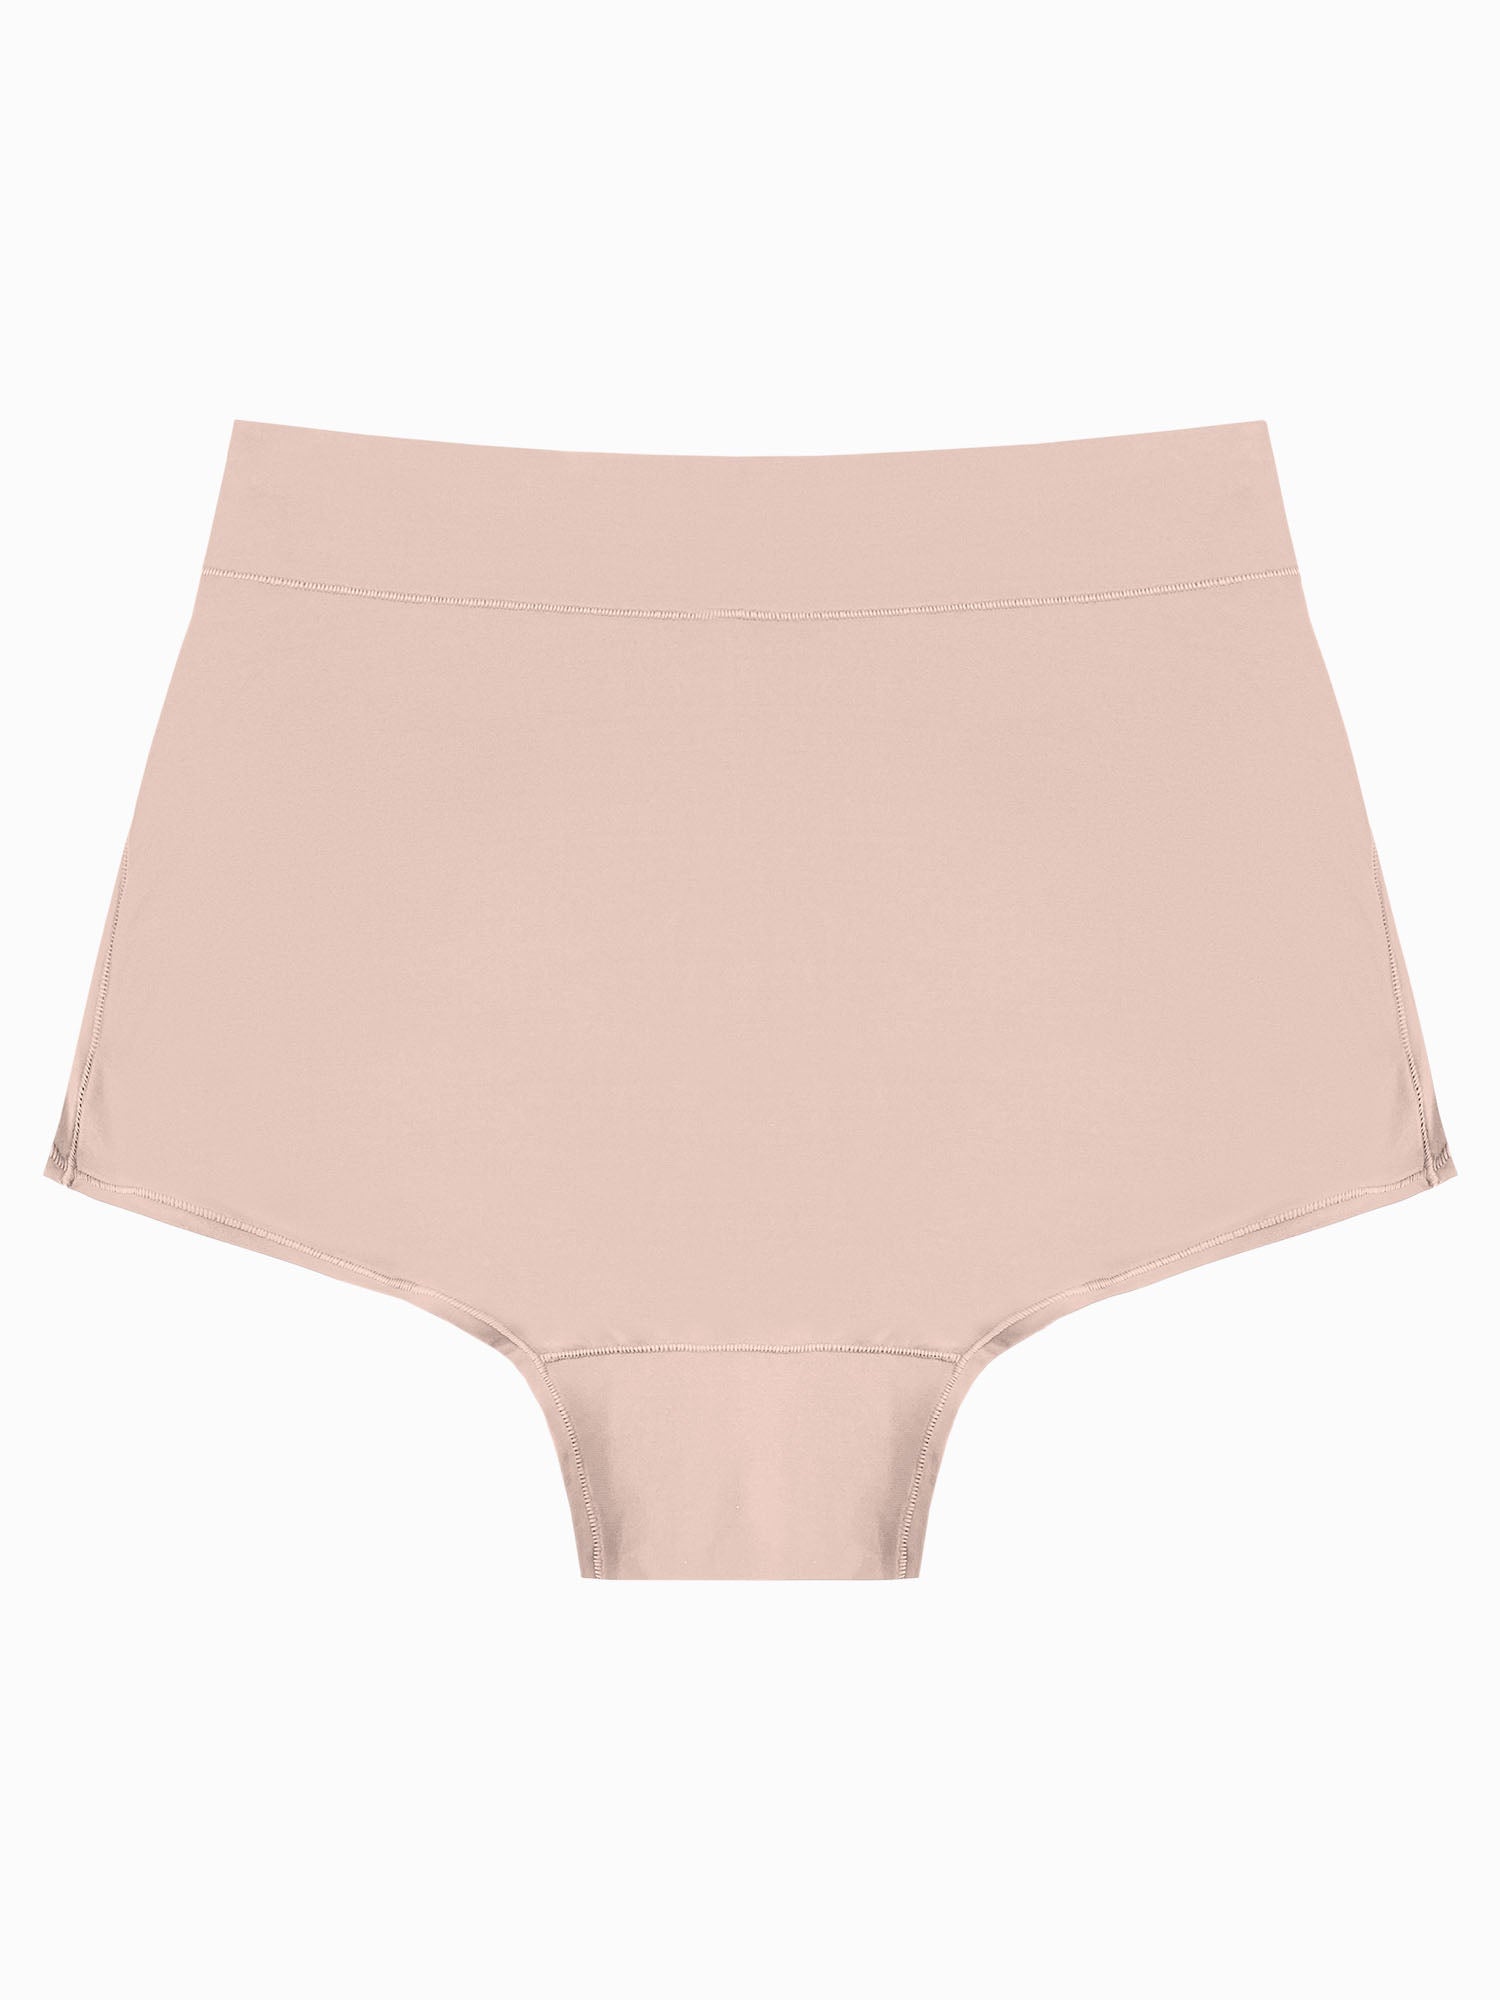 Product image of the Grow with Me™ Maternity & Postpartum Boyshort in Soft Pink